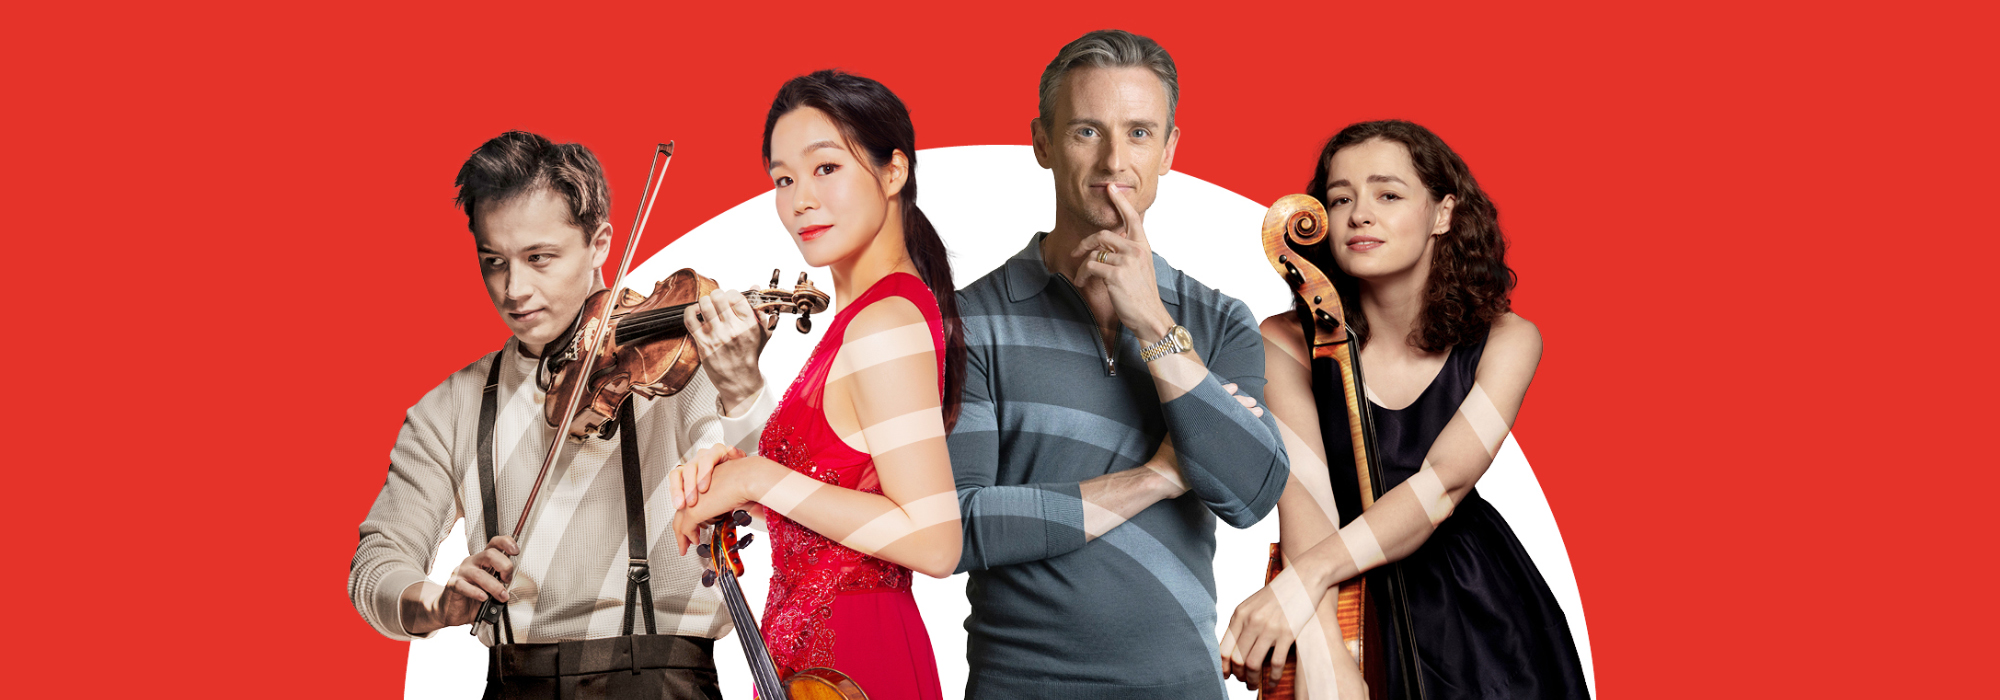 A red banner with a white semi circle. Overlaid are 4 people, left to right: Johan Dalene, Esther Yoo, Alexander Shelley and Anastasia Kobekina